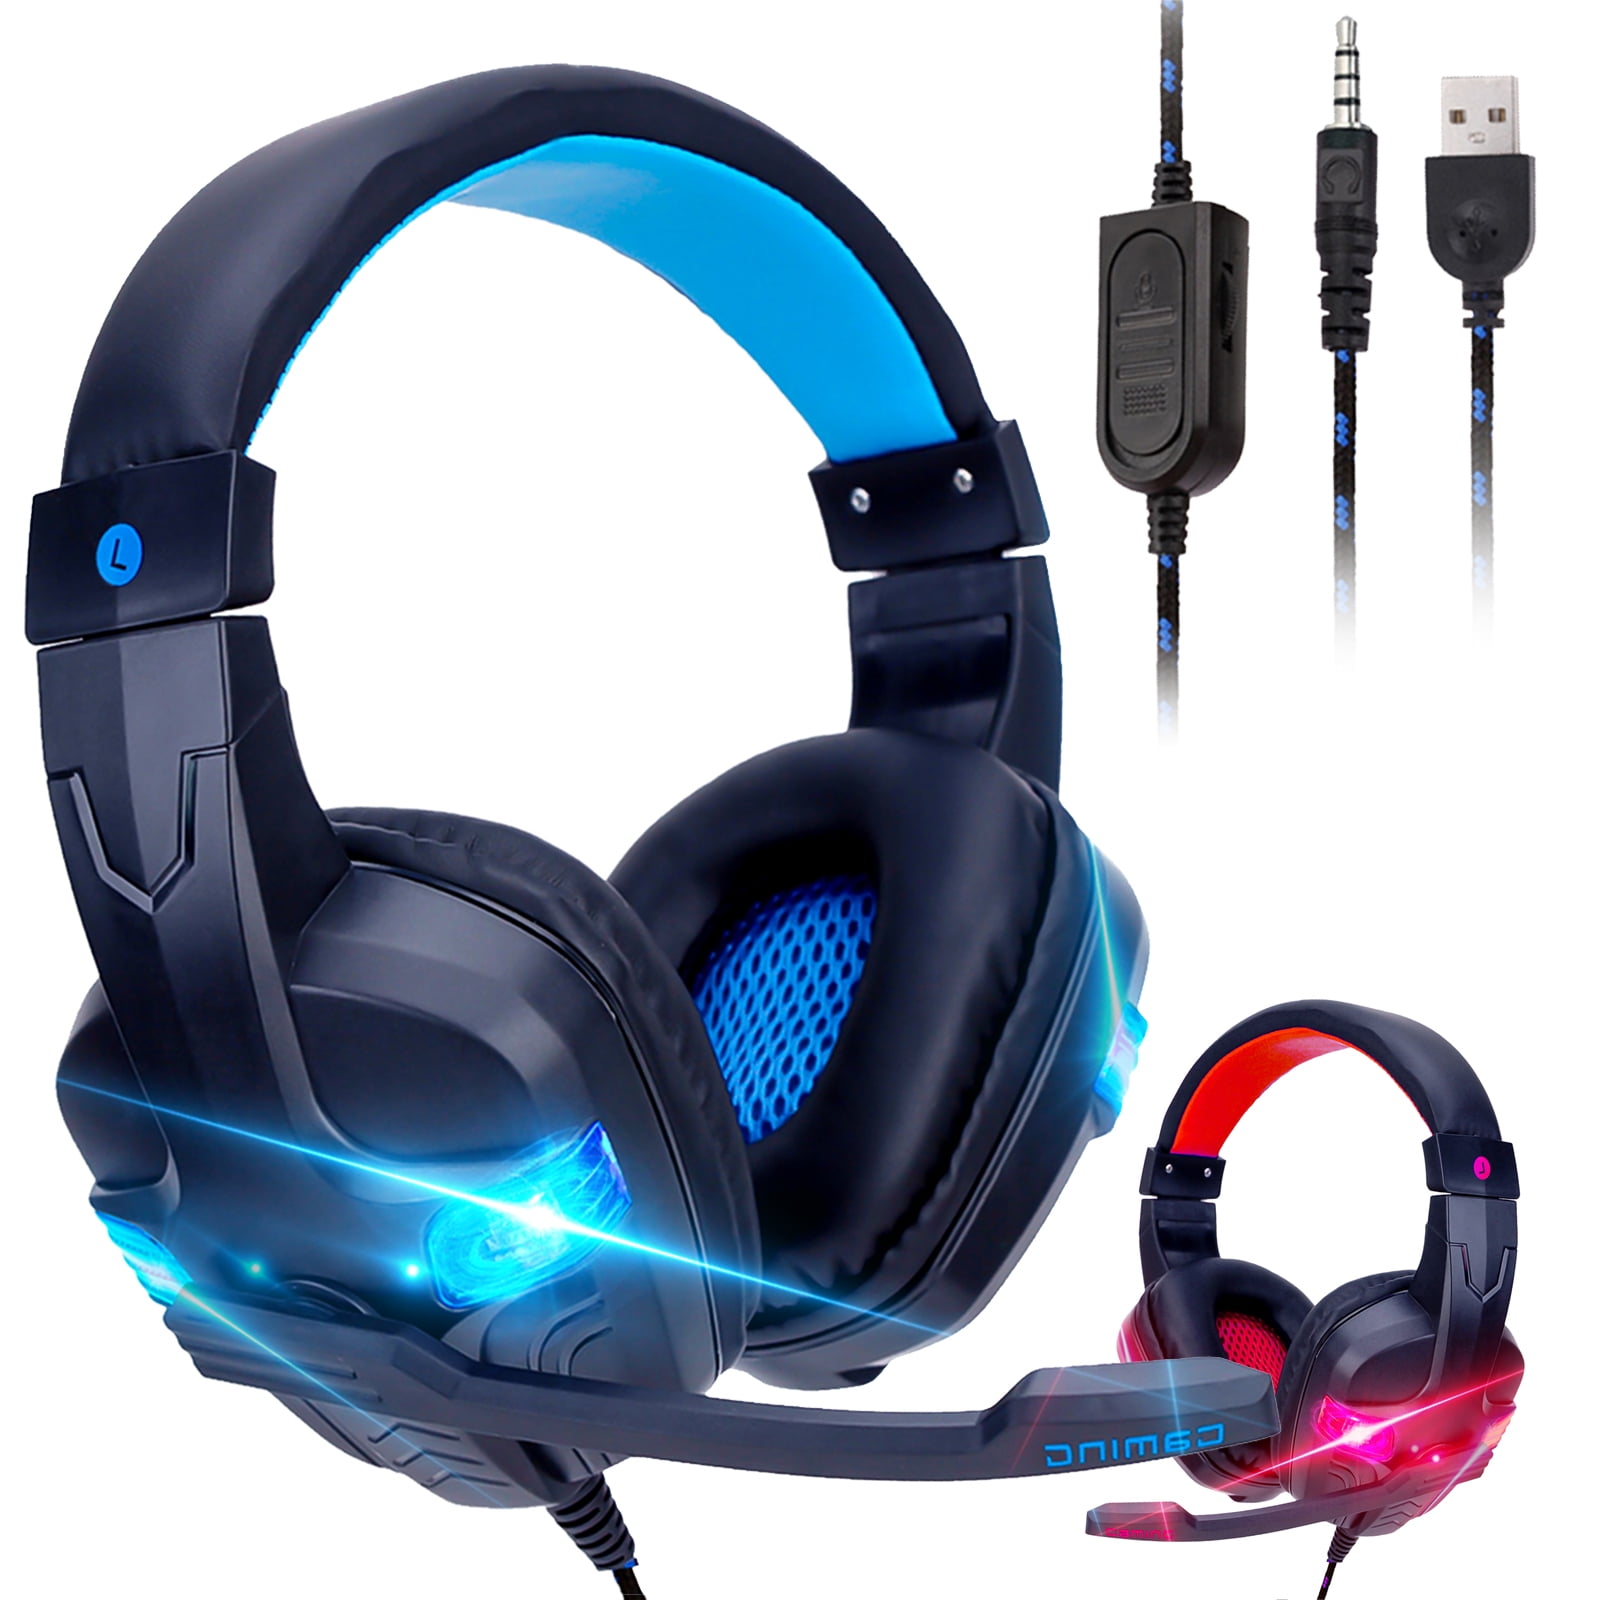 TSV Stereo Gaming Headset for PS4, Xbox One, Nintendo Switch, PC, Mac, Laptop, Over-Ear Headphones 3.5mm PS4 Headset Xbox One Headset with Surround Sound, LED Light & Noise Canceling Microphone